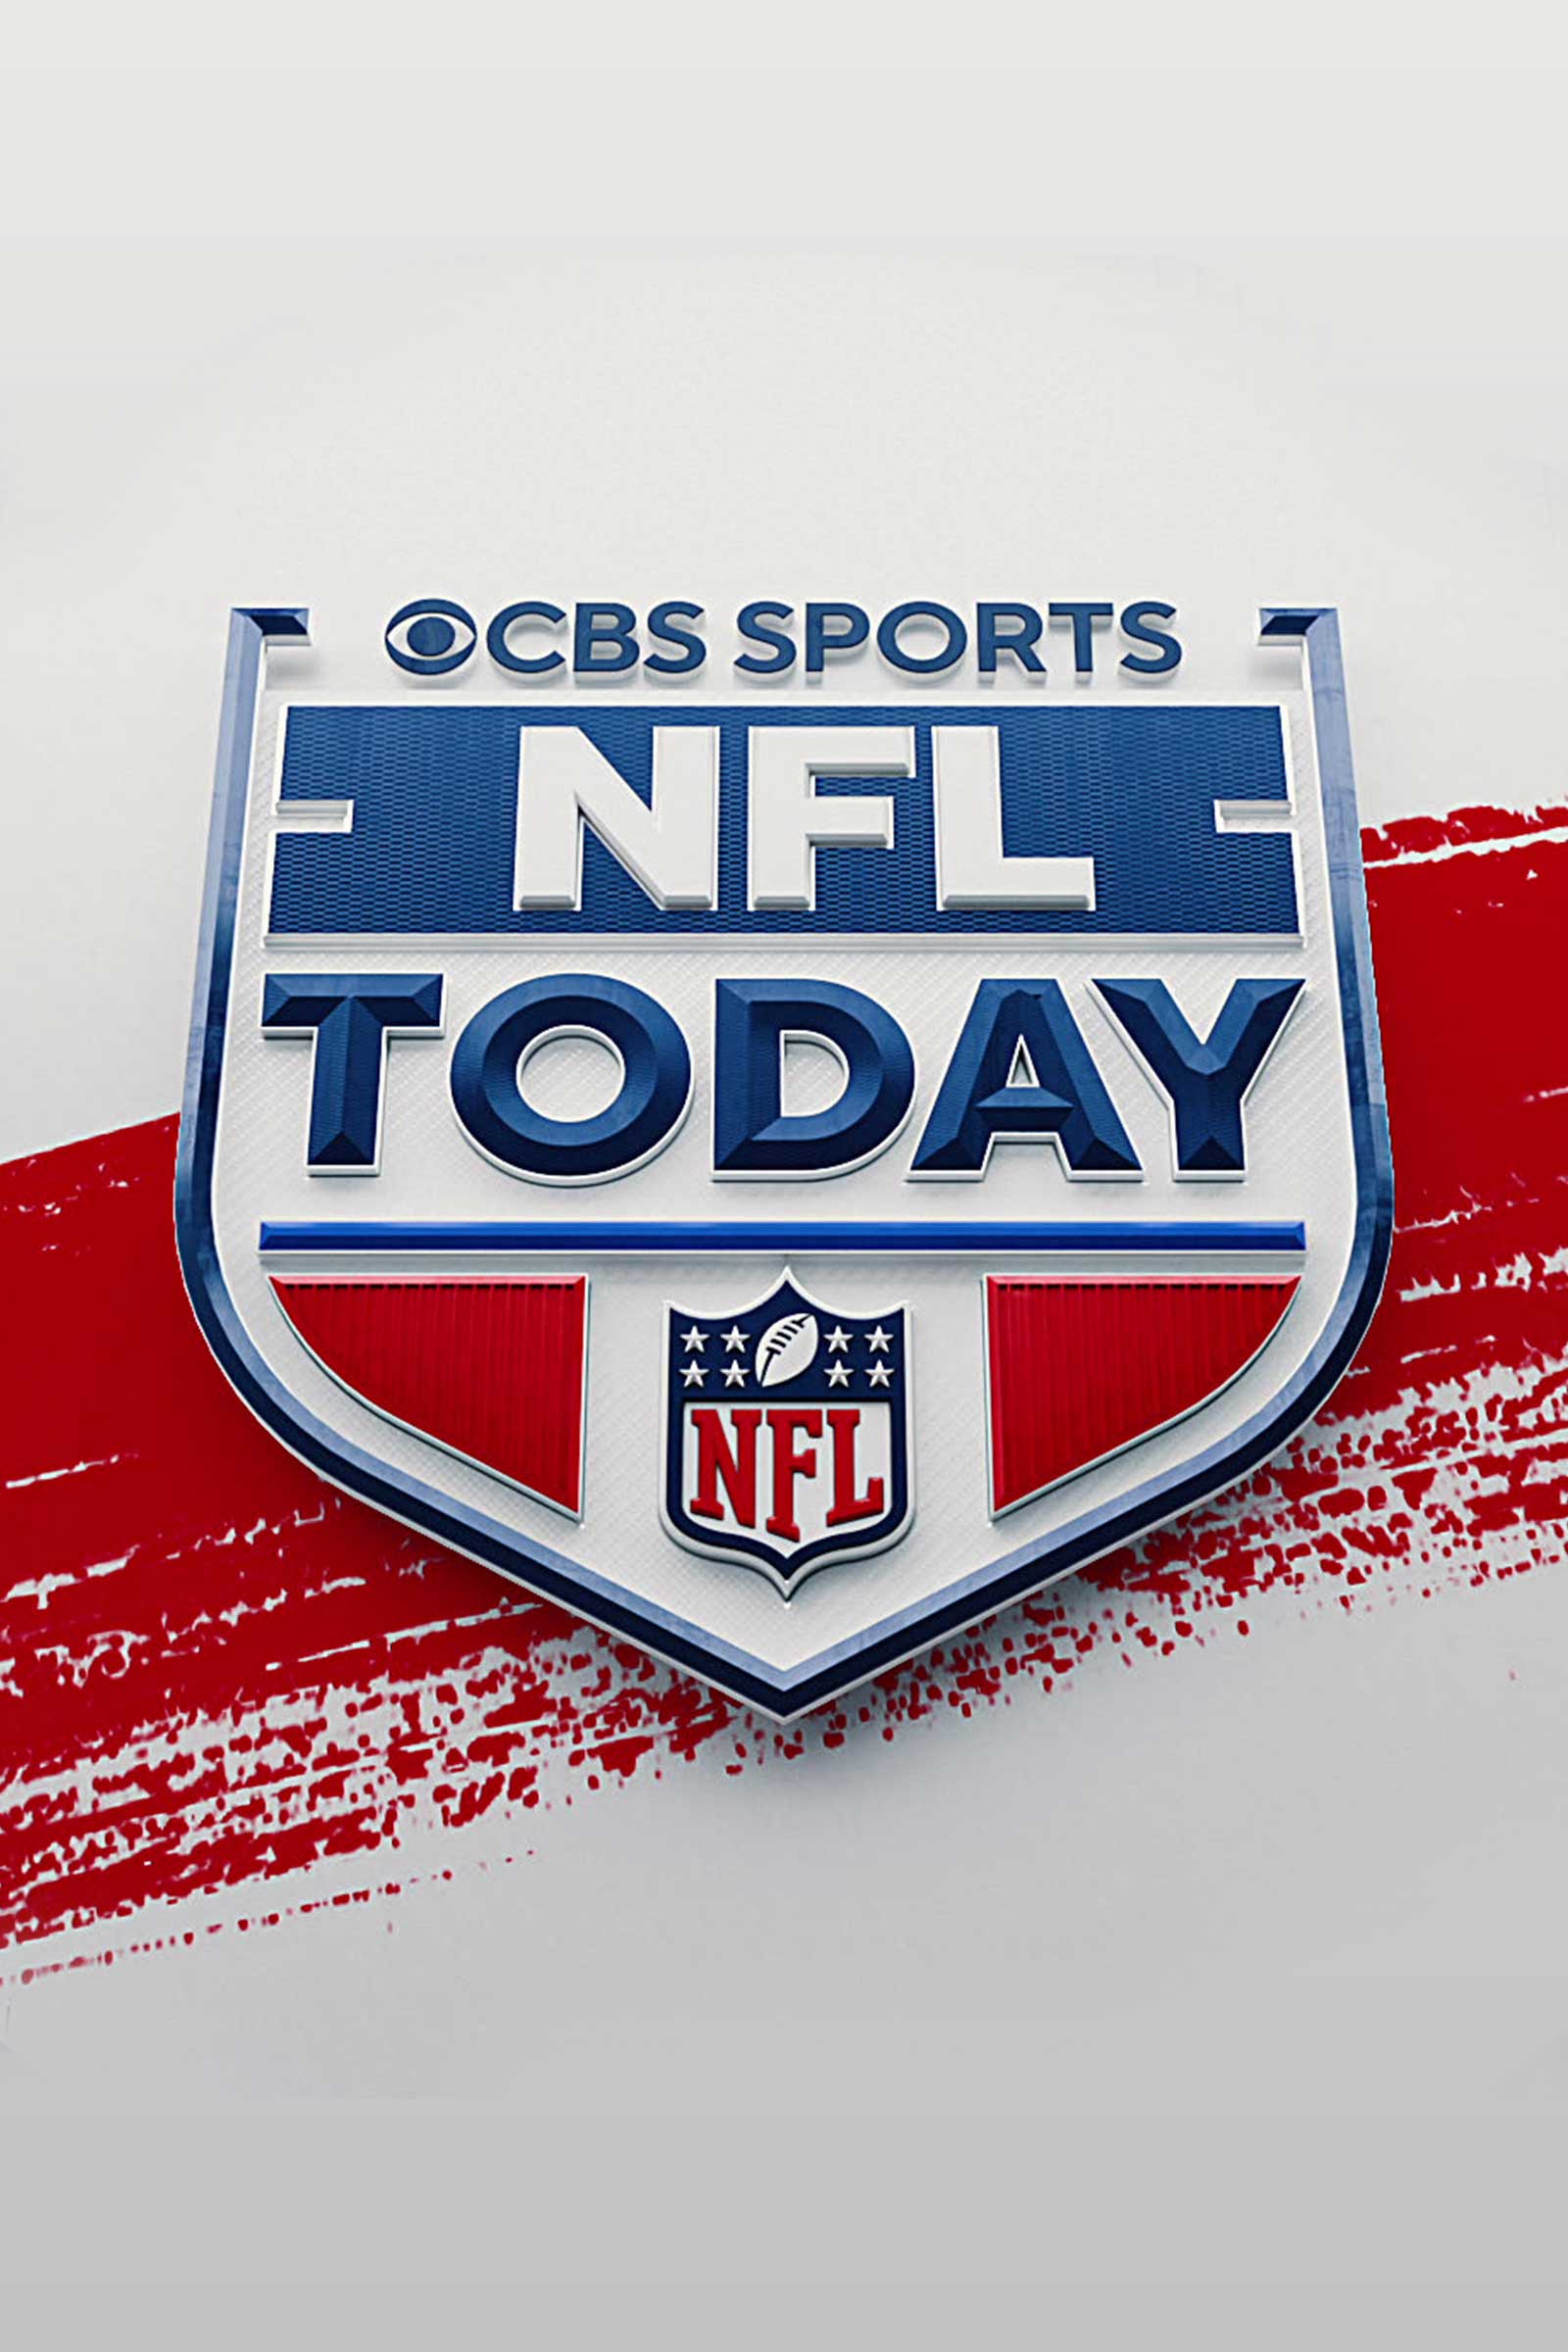 nfl games today on tv tonight